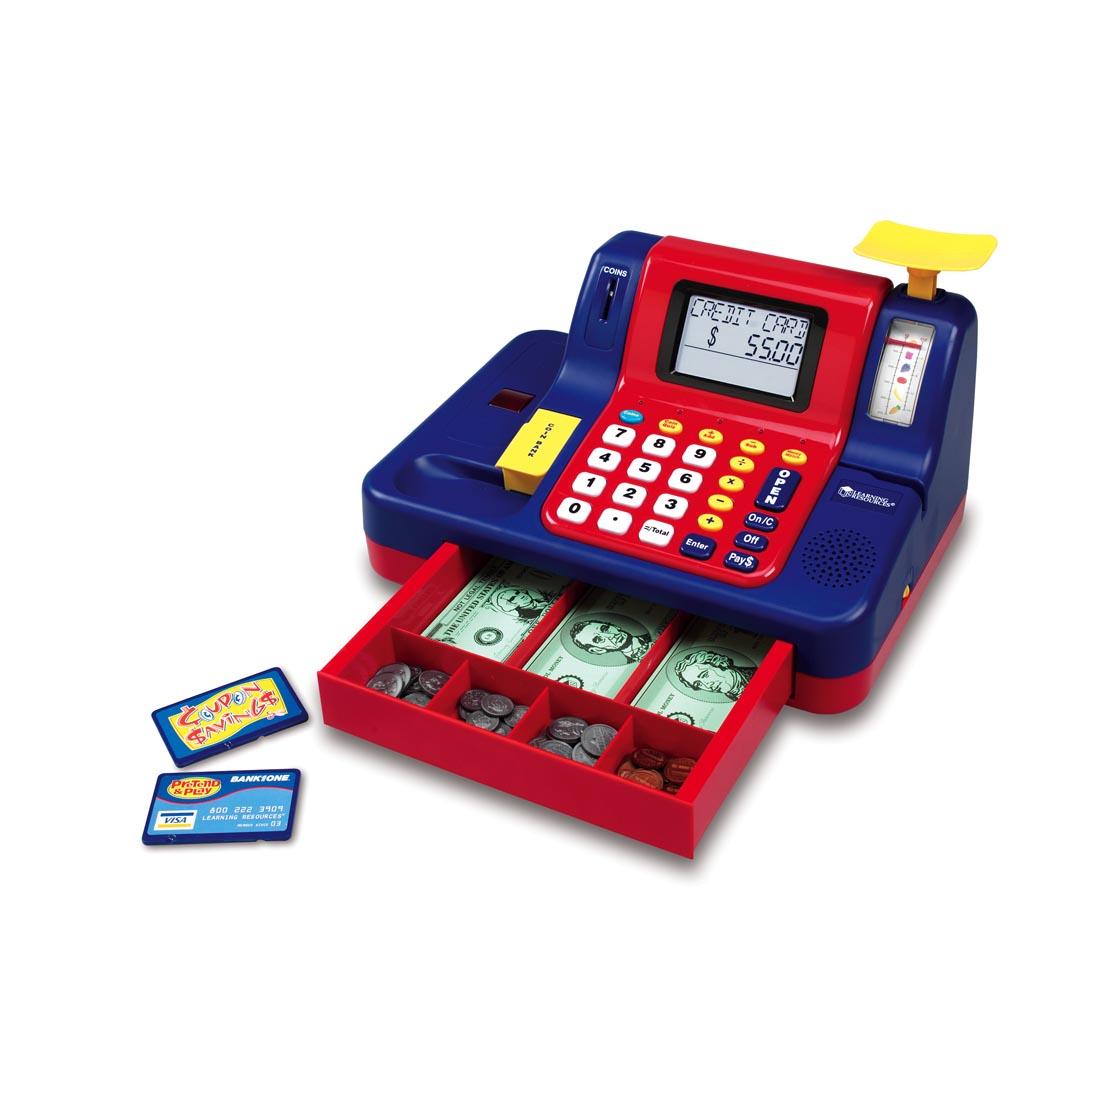 Teaching Cash Register with play money and pretend credit card